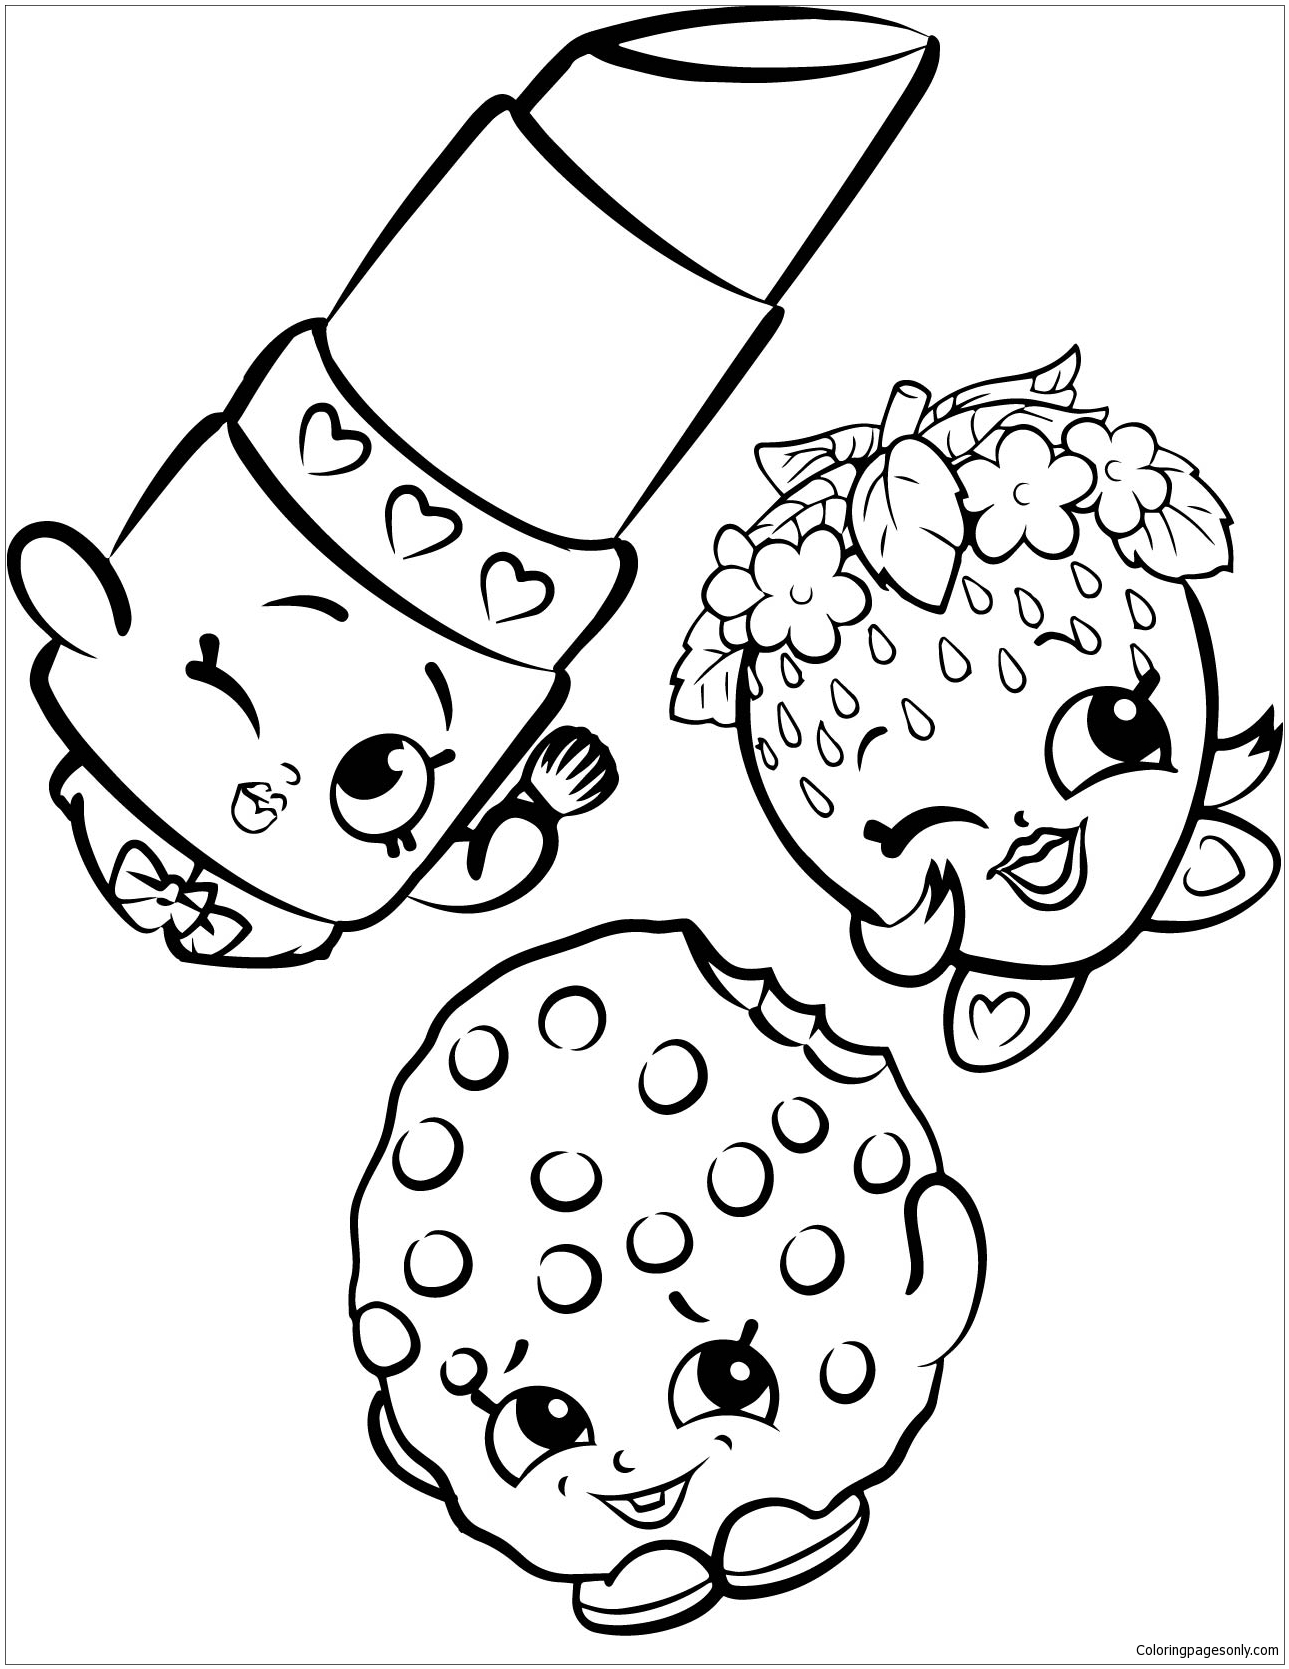 Sweet Shopkins Characters Coloring Page